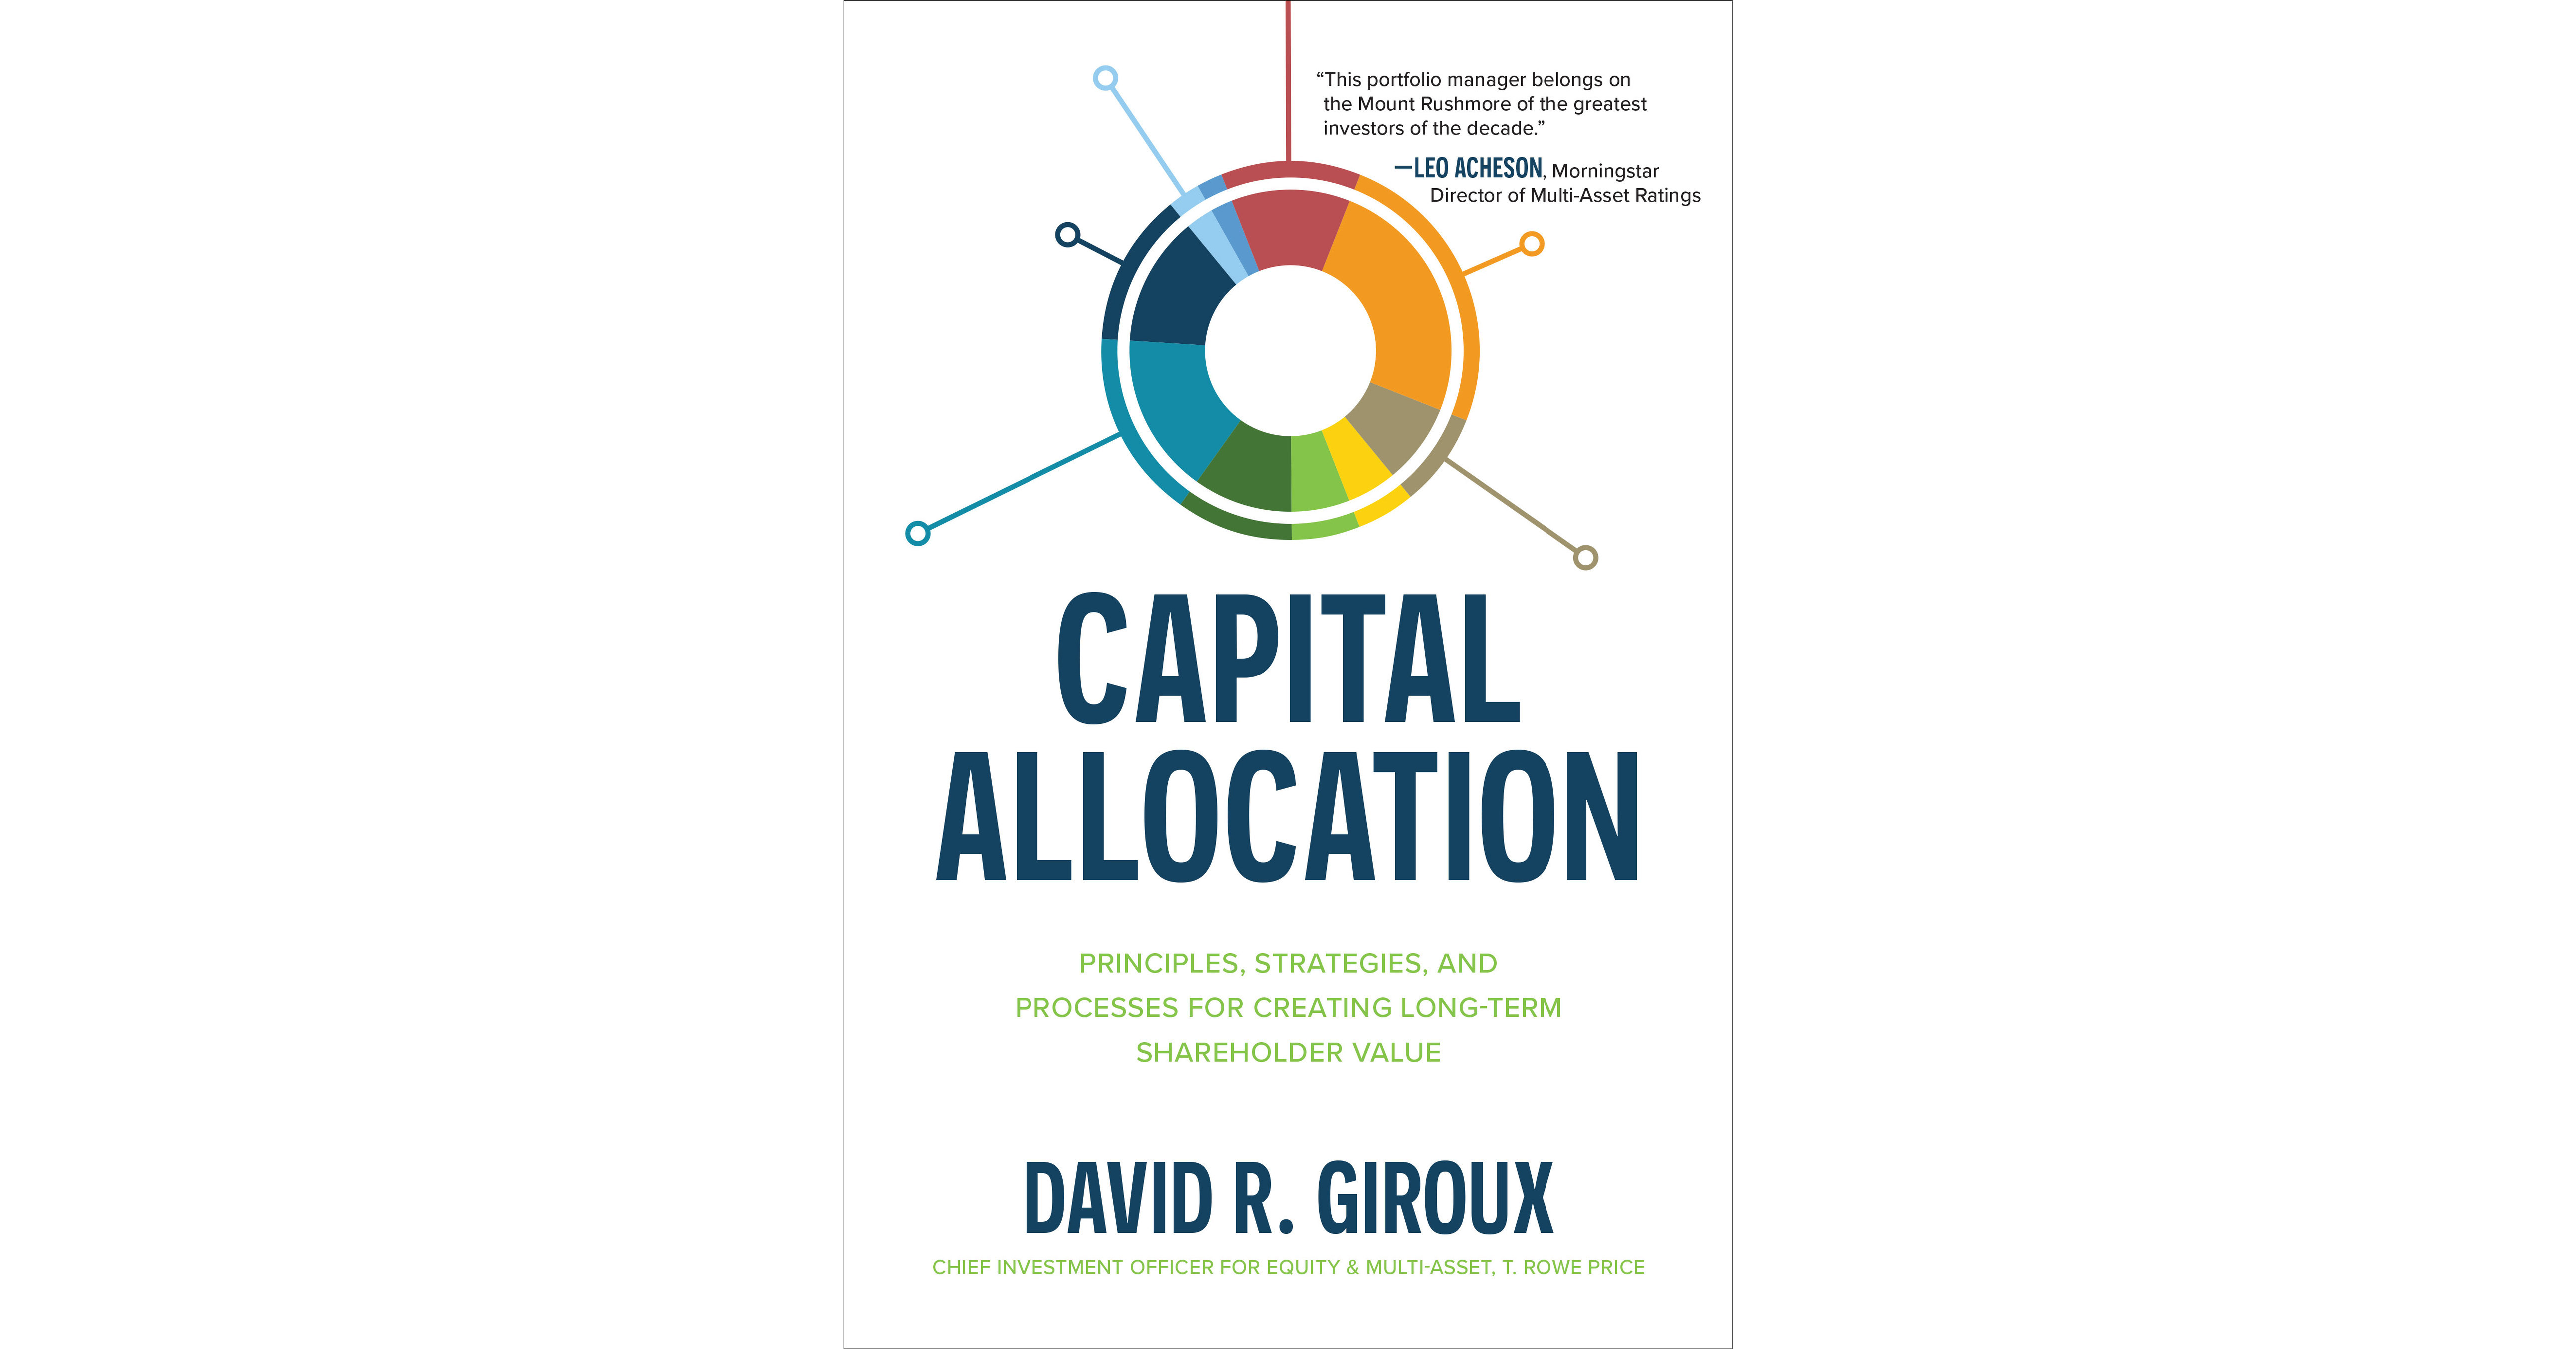 T. ROWE PRICE'S DAVID GIROUX OFFERS INVESTING INSIGHTS IN NEW BOOK